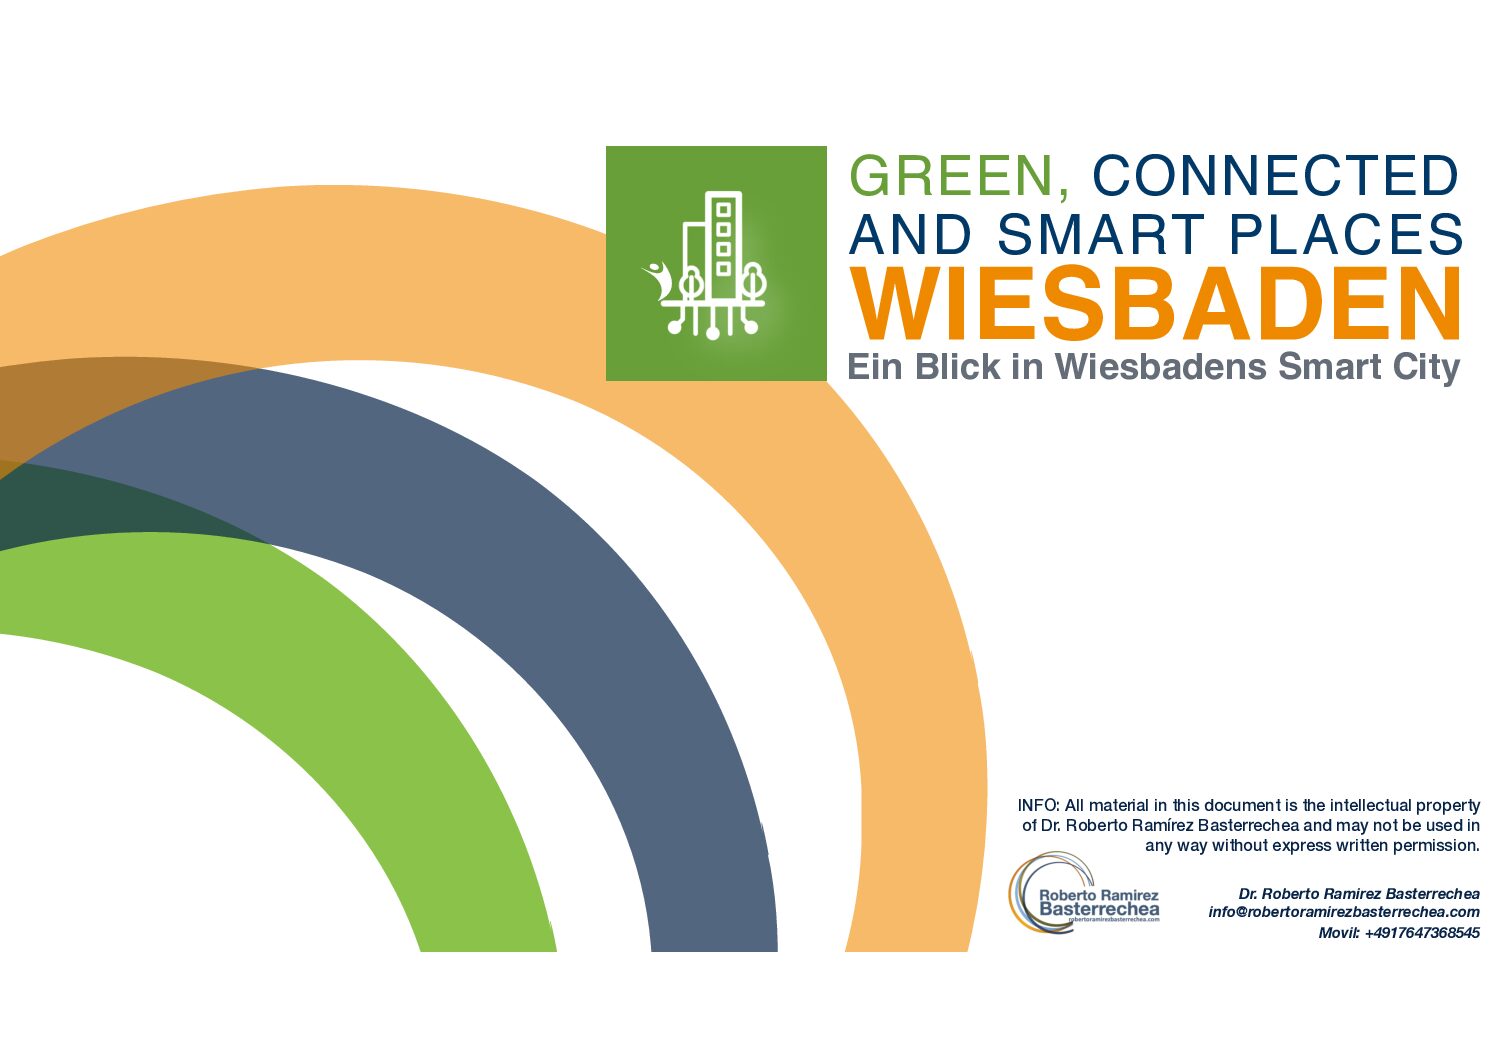 GREEN, CONNECTED AND SMART PLACES WIESBADEN